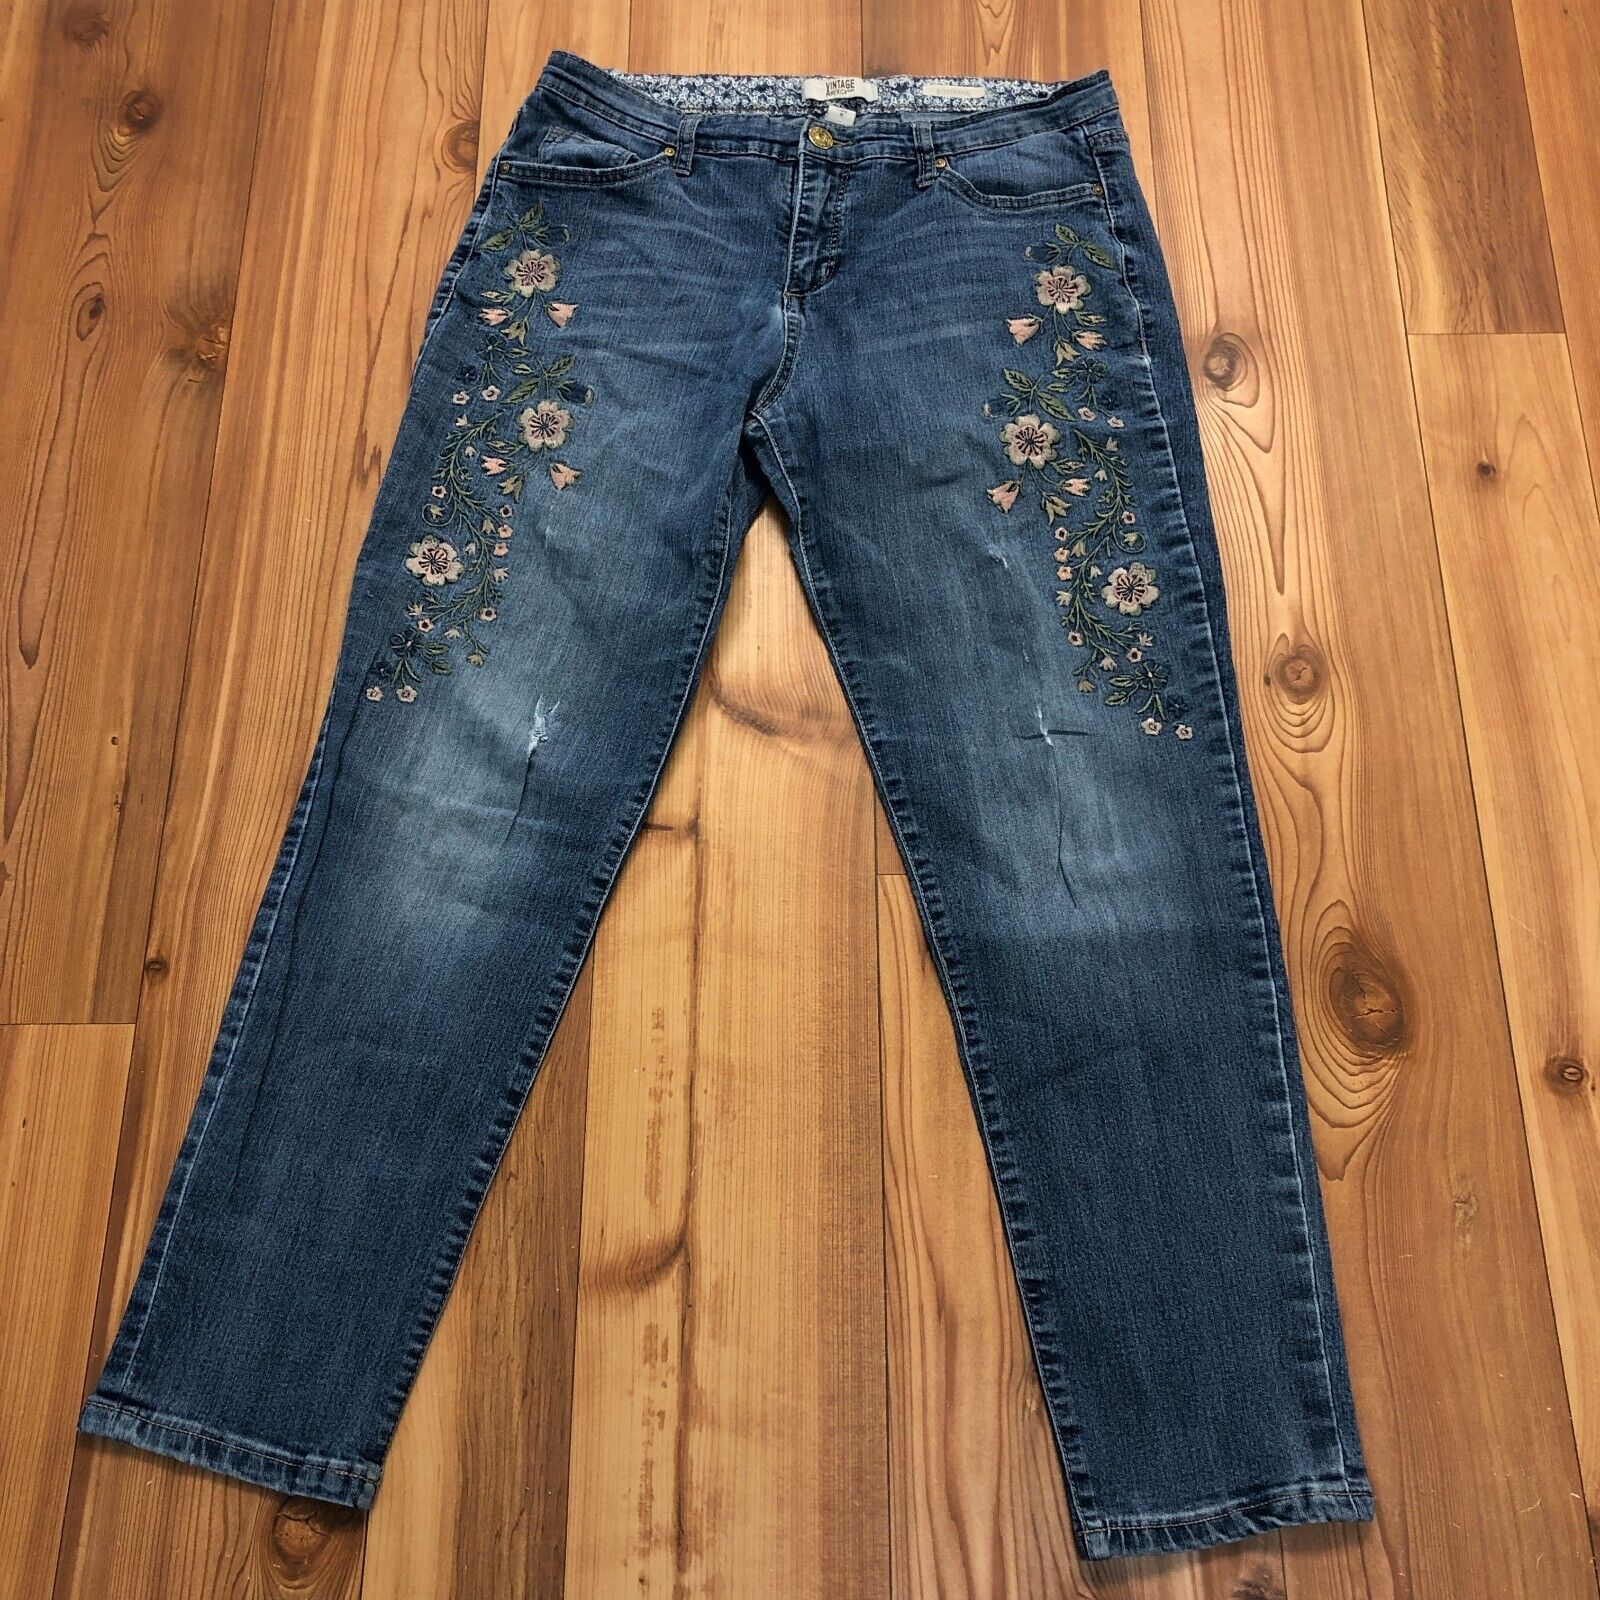 Vintage America Blue Bestie Floral Embroiderey Distressed Jeans Women Size 8